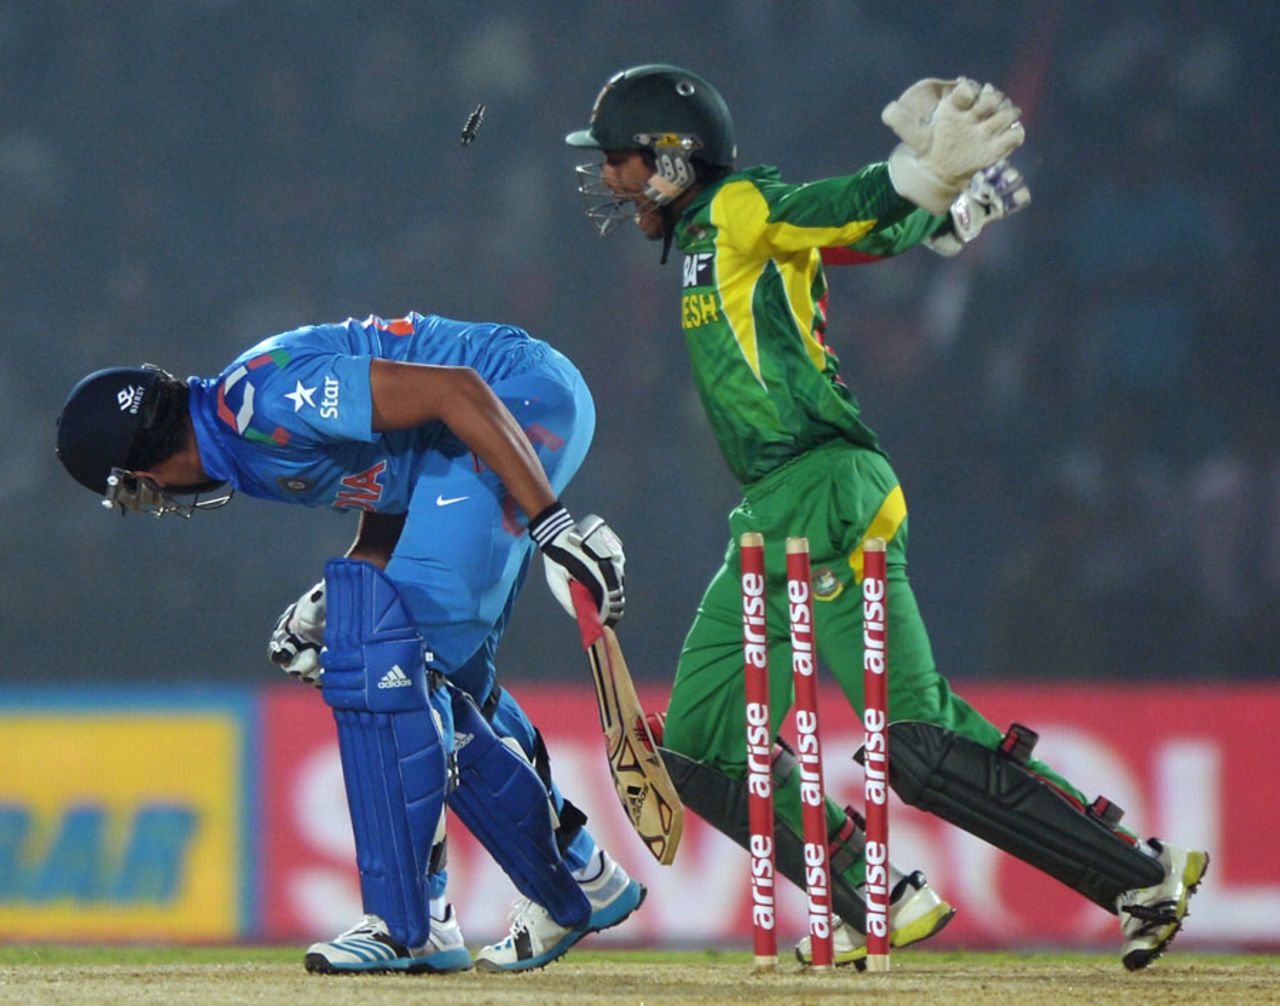 Rohit Sharma was bowled by an indipper, Bangladesh v India, Asia Cup 2014, Fatullah, February 26, 2014